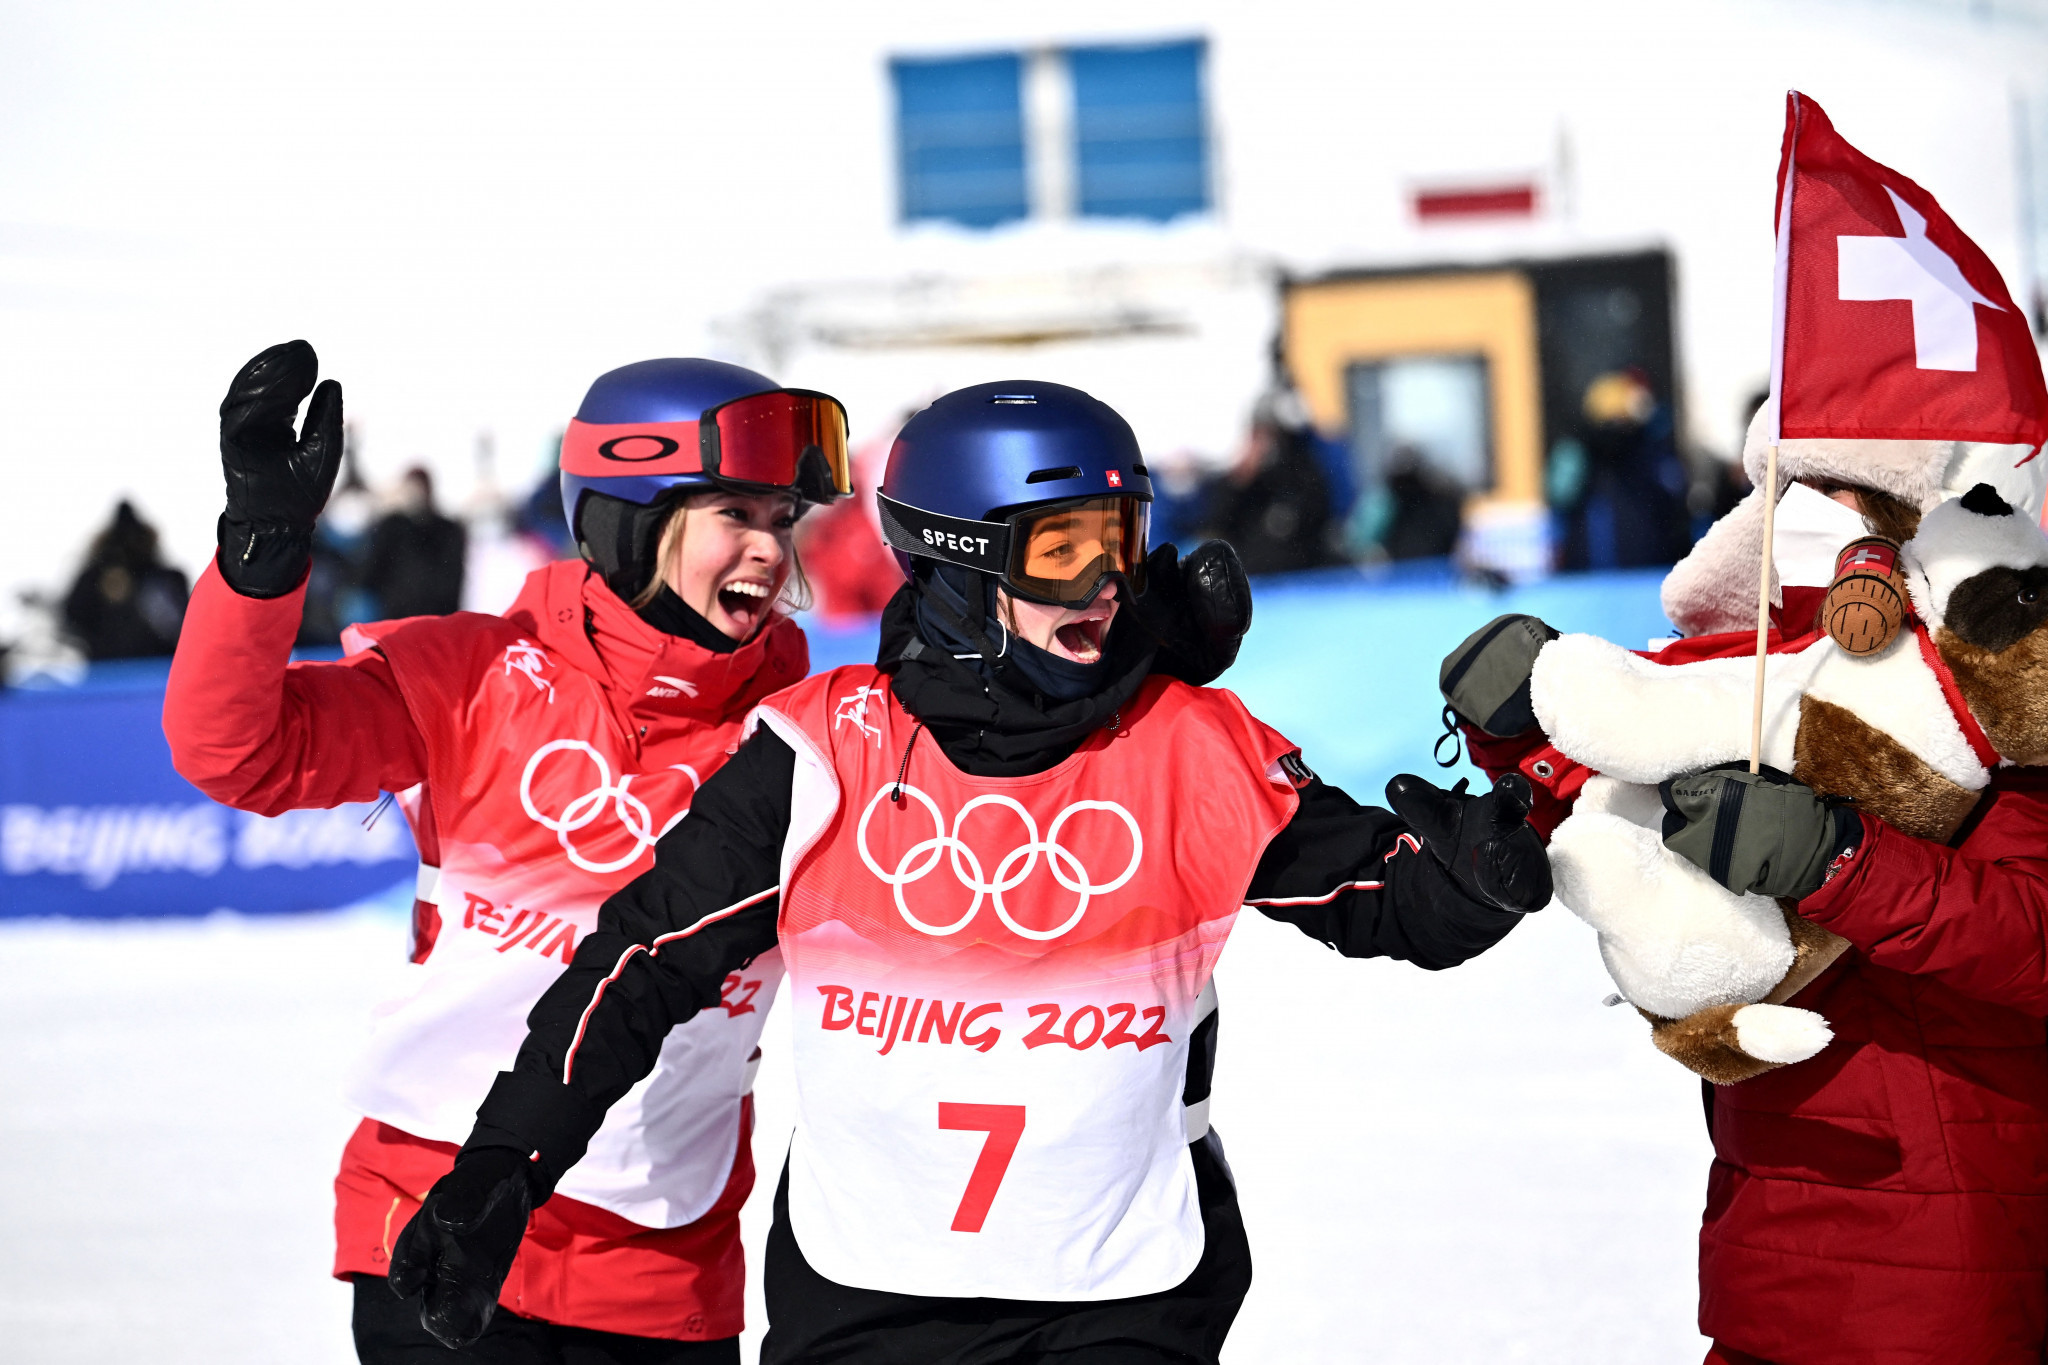 Switzerland's Mathilde Gremaud, right, celebrating her women's ski slopestyle Olympic gold medal at Beijing 2022 with China's Eileen Gu, left ©Getty Images